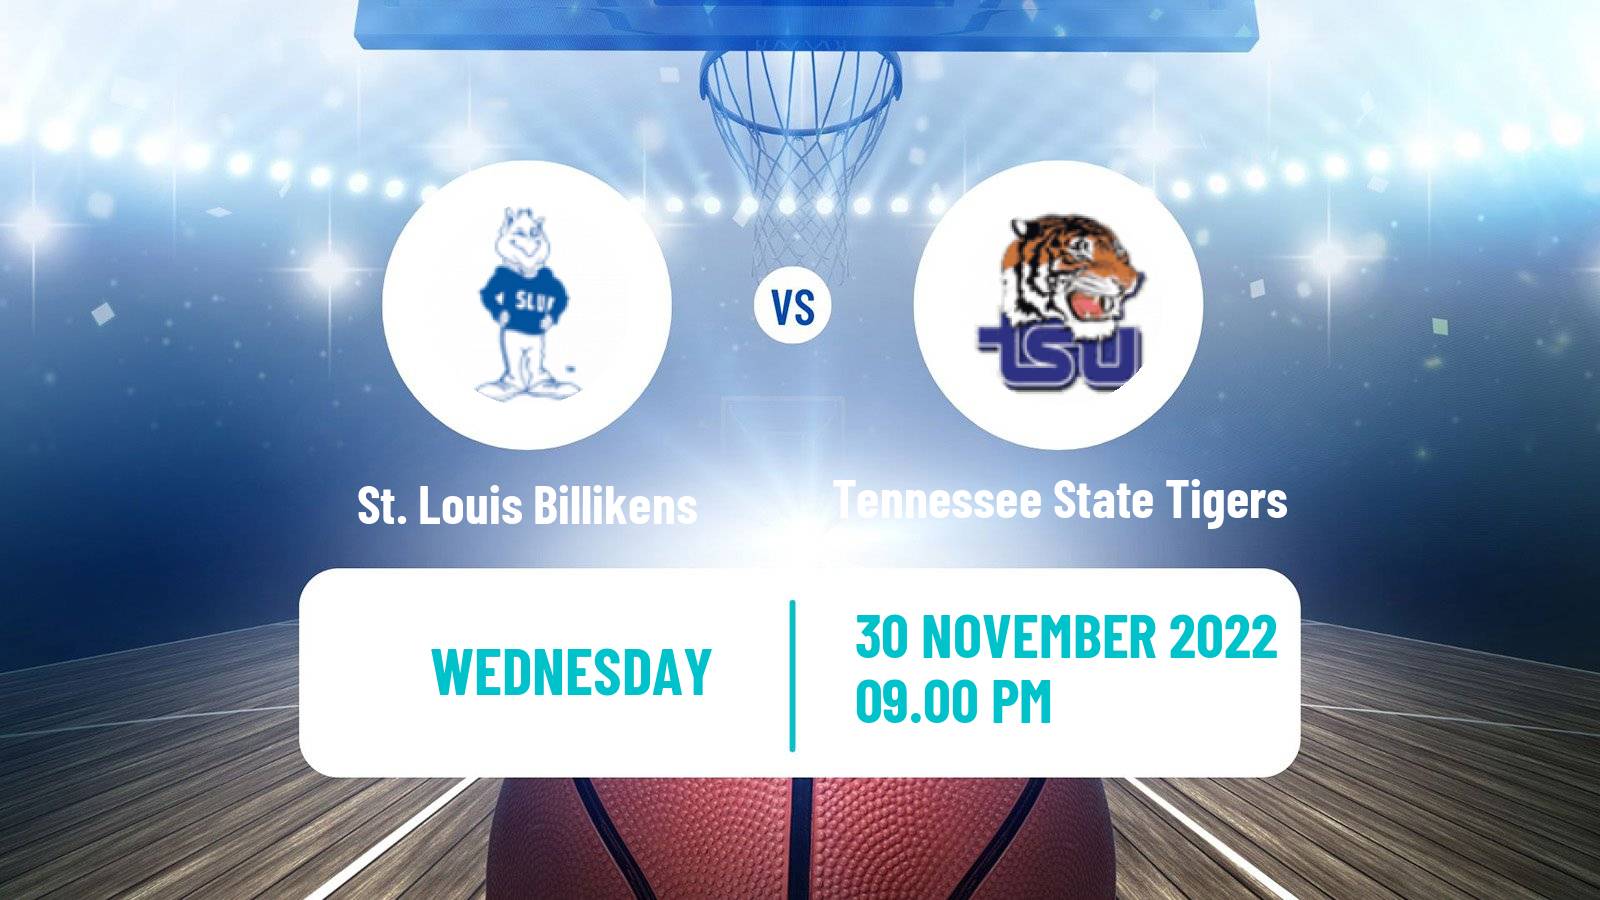 Basketball NCAA College Basketball St. Louis Billikens - Tennessee State Tigers